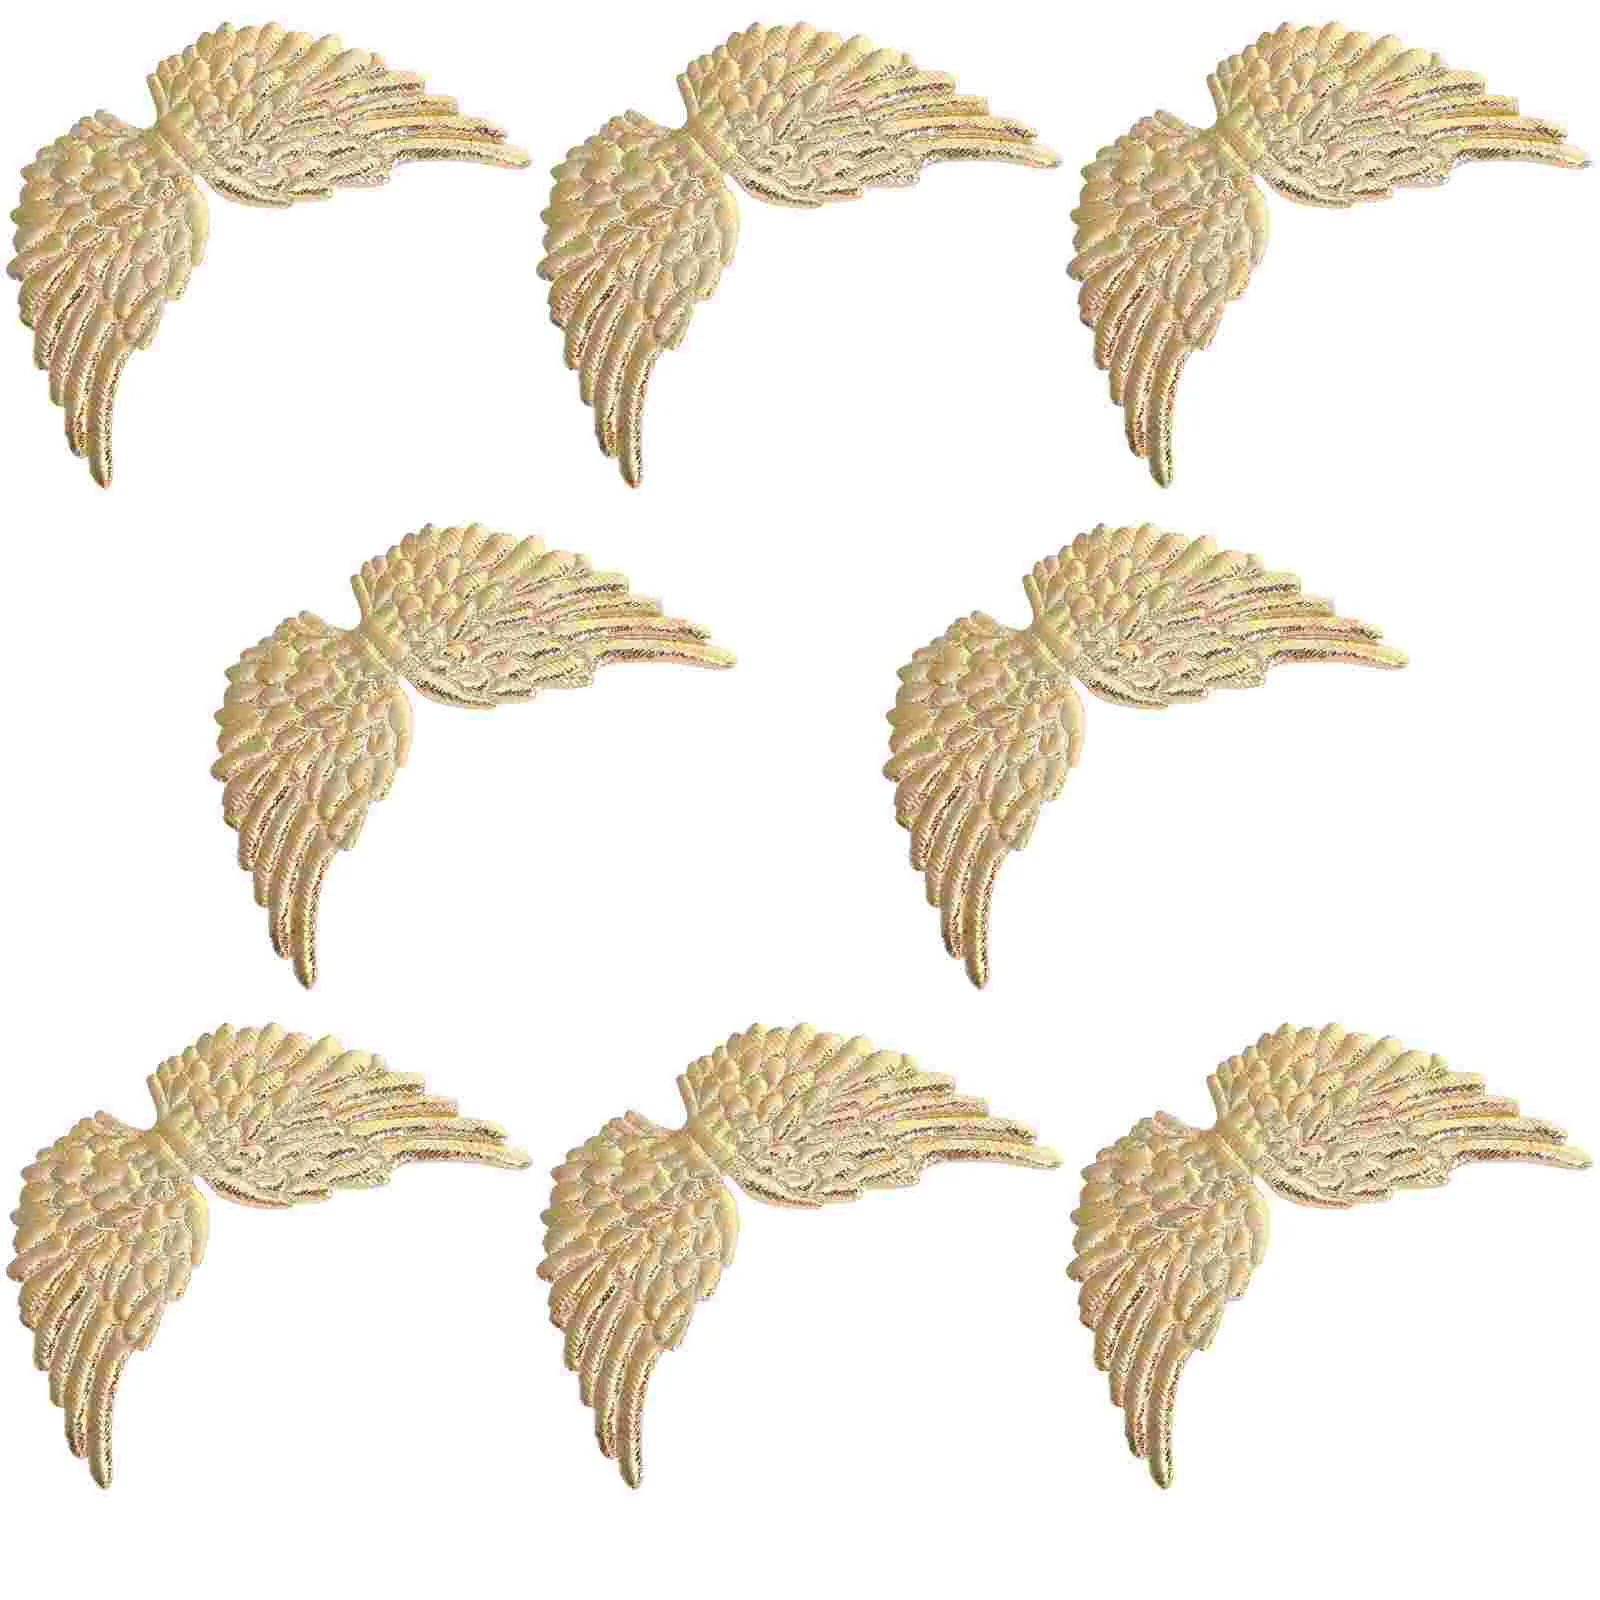 

12 Pcs Ornaments Christmas Tree Angel Wings Patches Decorations Home Office Holiday Gift Fairy Cake Topper Bulk